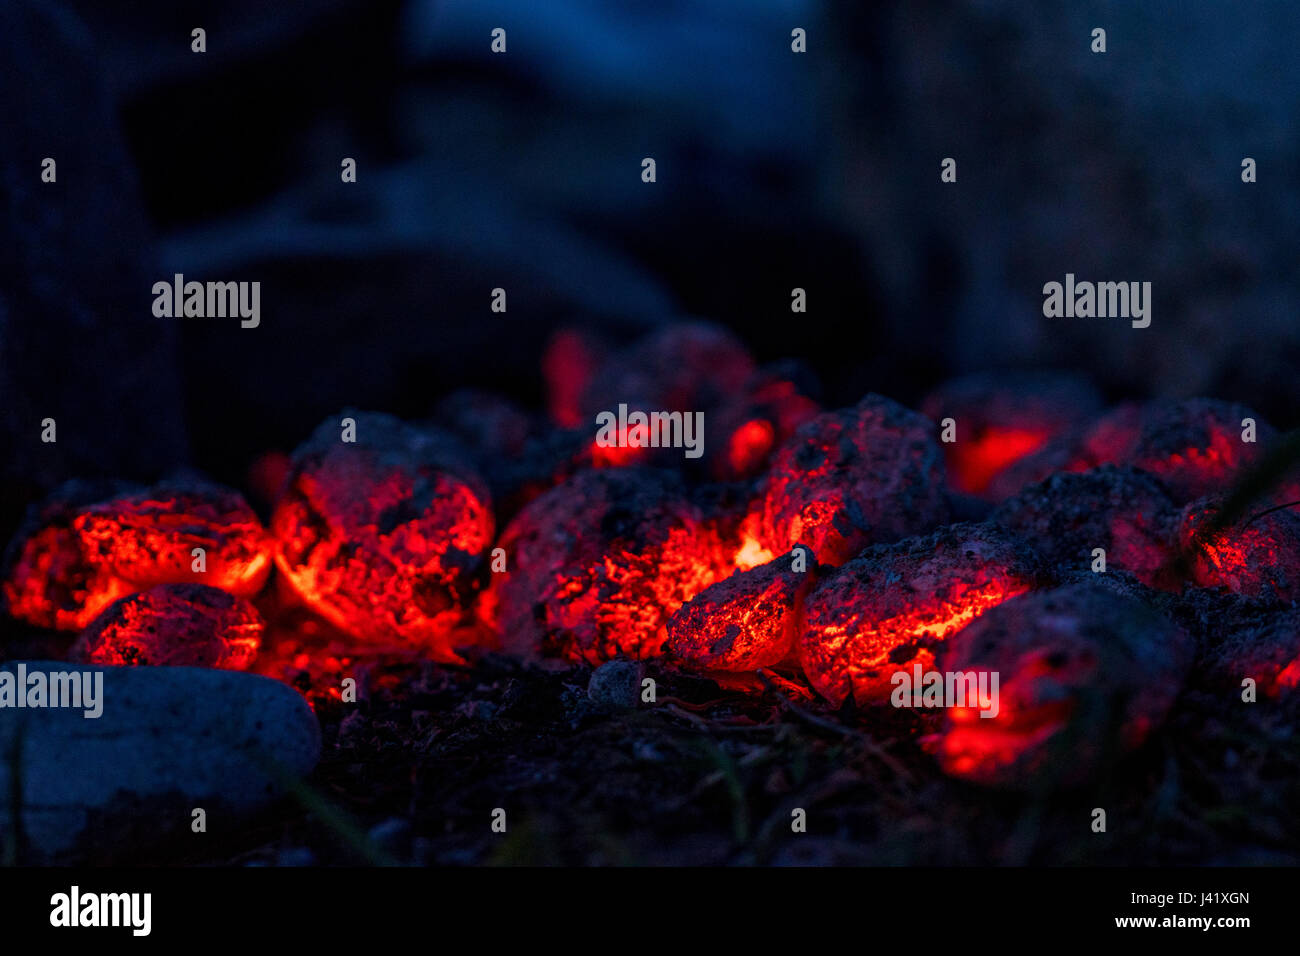 BBQ Grill Pit With Glowing And Flaming Hot Charcoal Briquettes Stock Photo